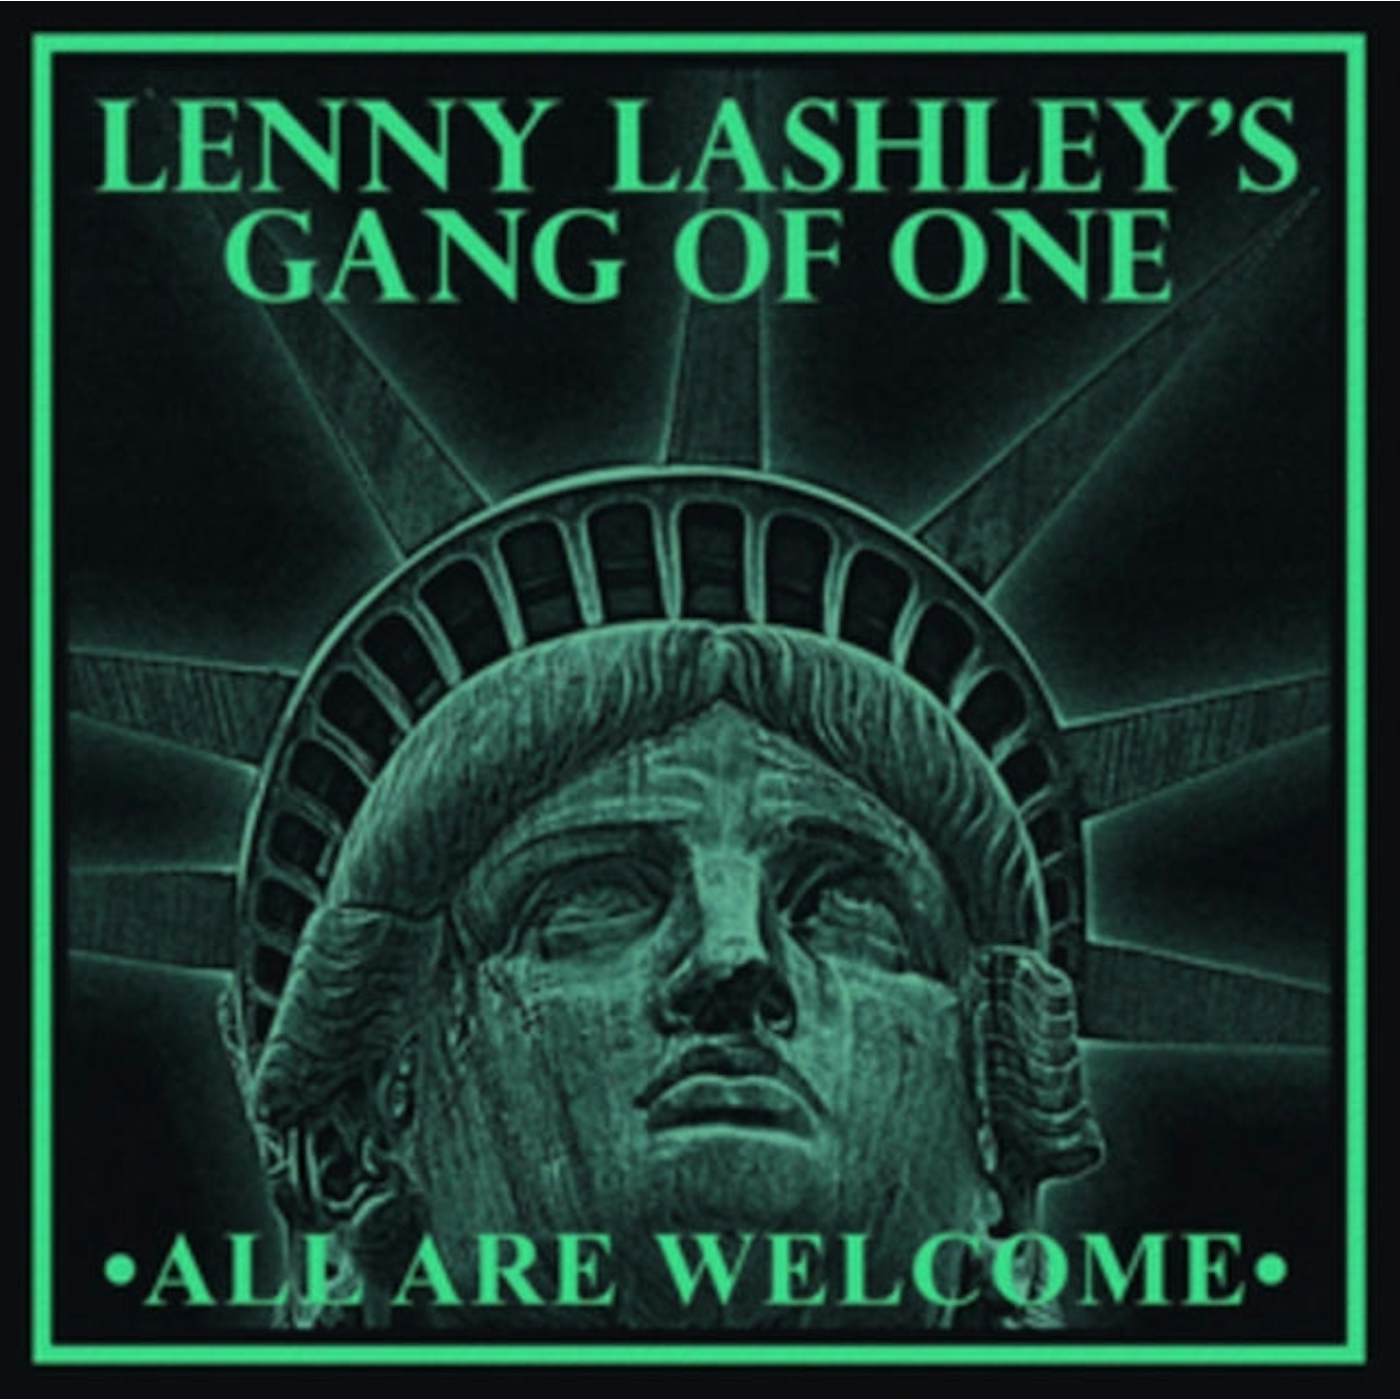 Lenny Lashley'S Gang Of One LP - All Are Welcome (Exclusive Coke Bottle Green Vinyl)